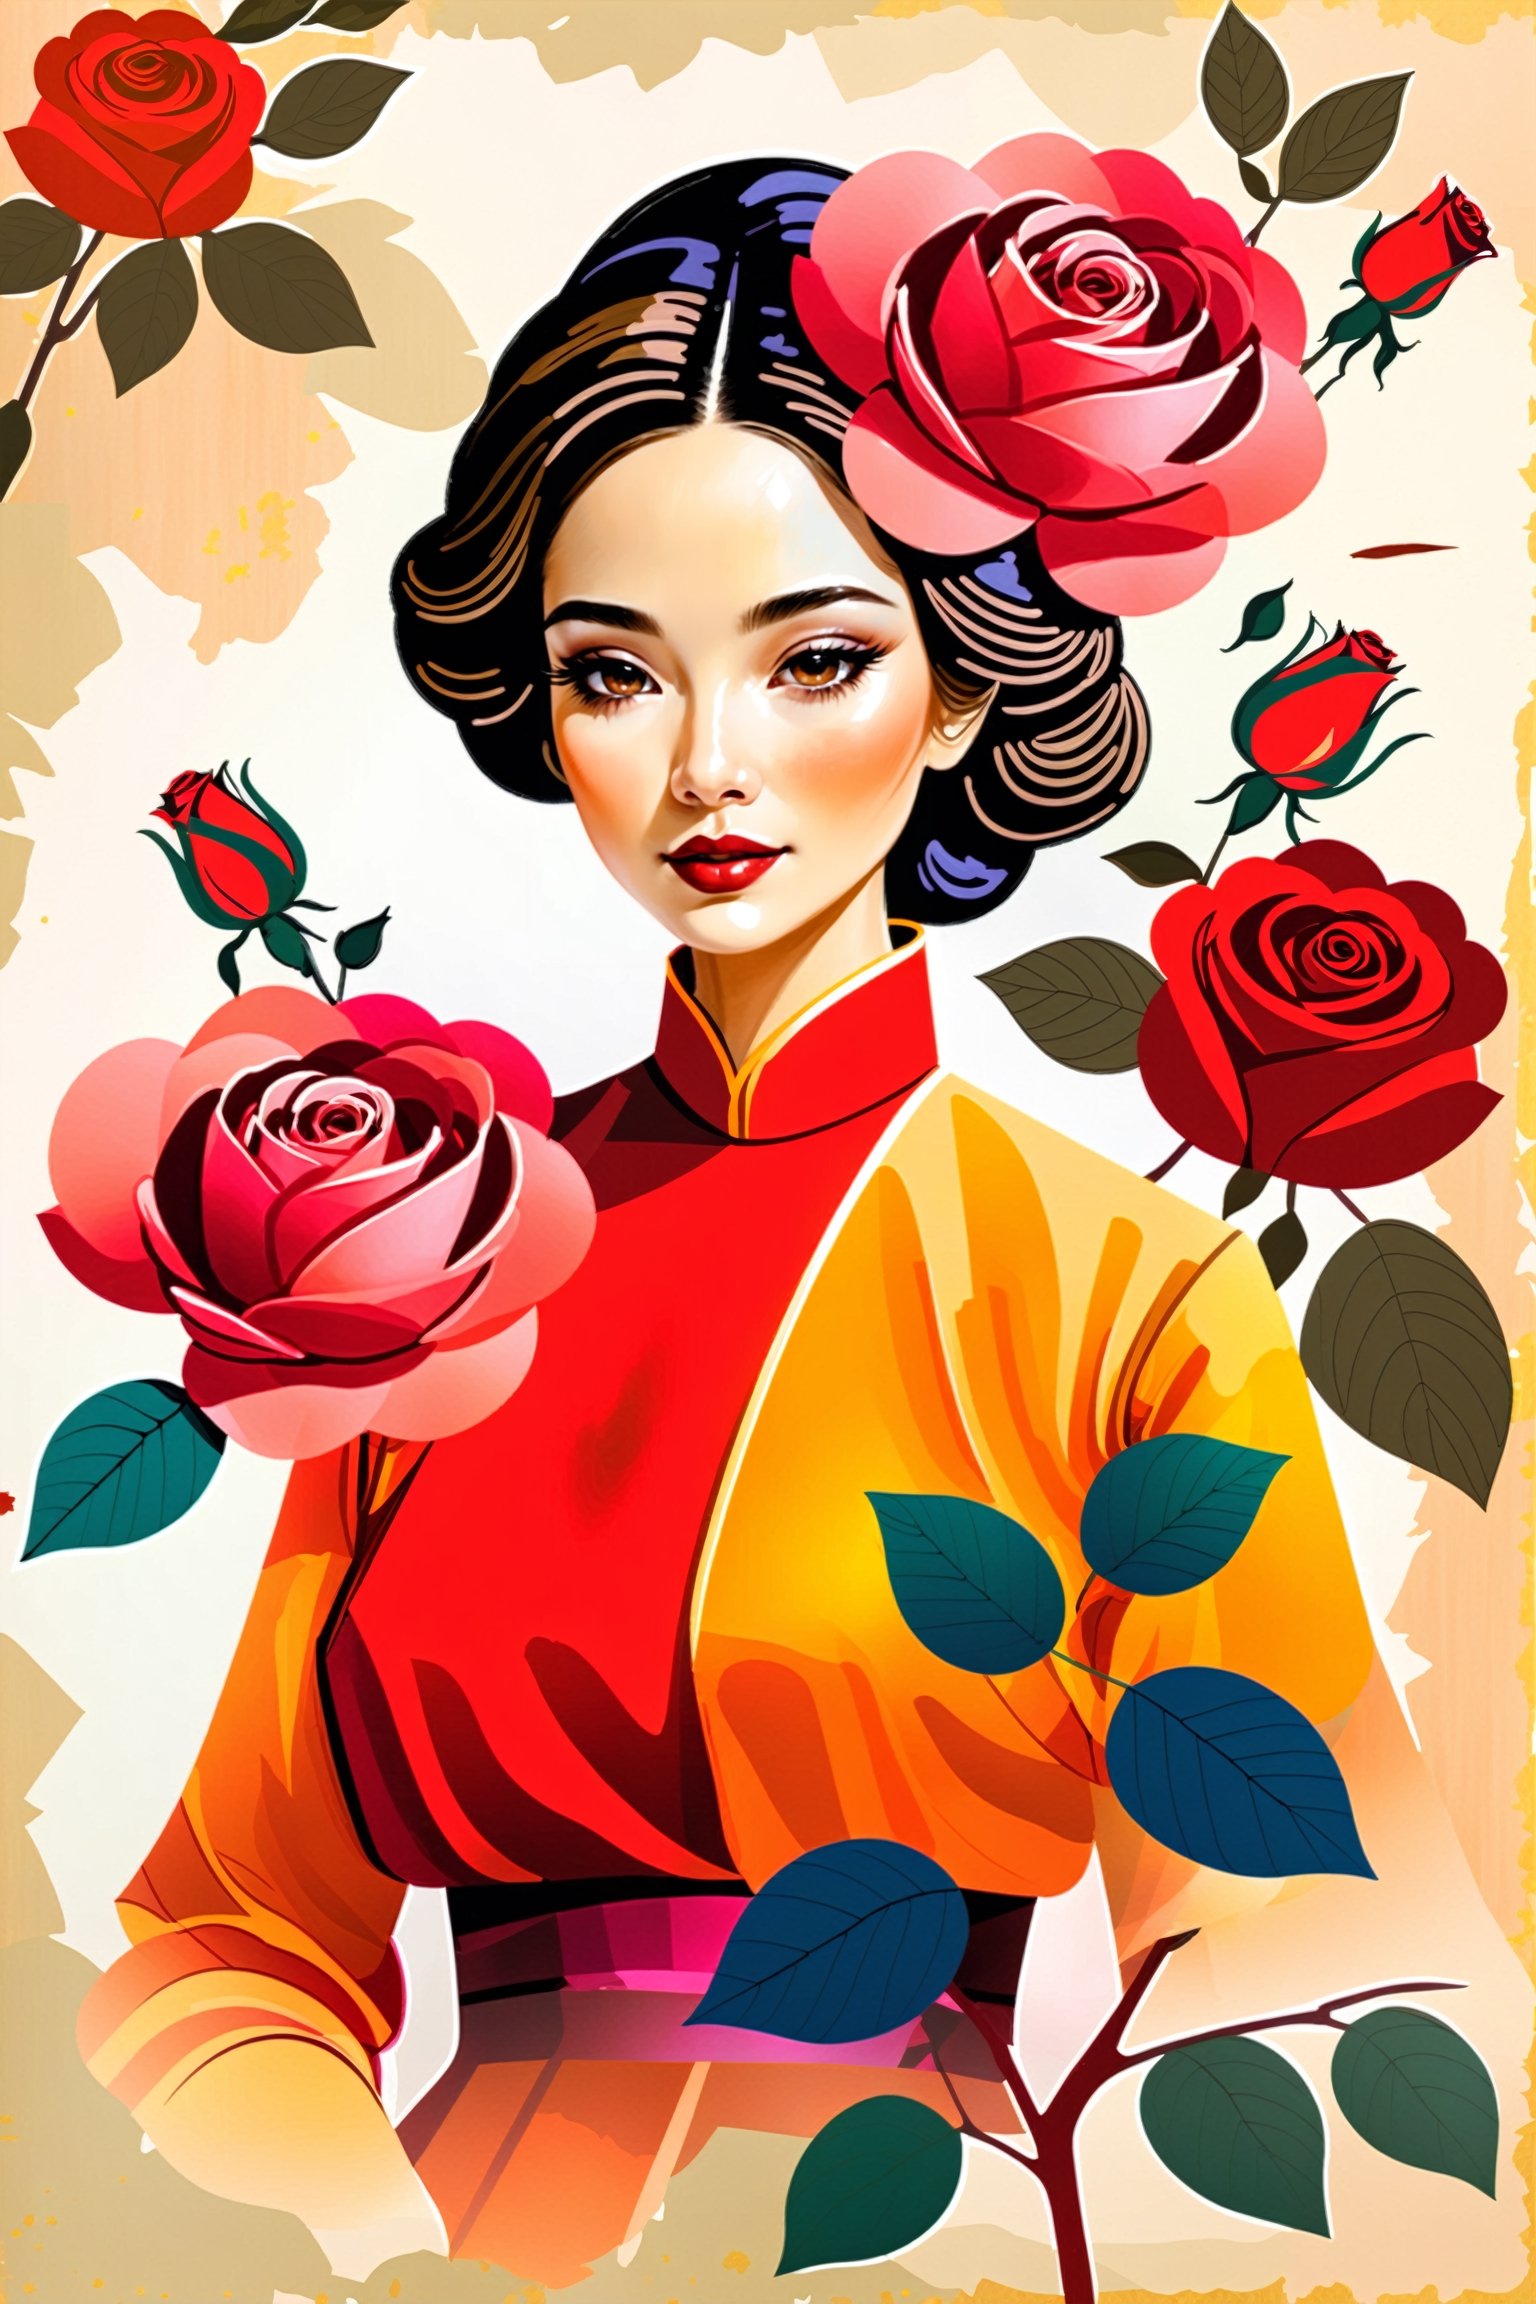 Create a modern-styled sketch portrait in silk textured old paper of a gentle lady inspired by roses and love, utilizing the vibrant color palettes and sleek lines reminiscent of the works by Vietnamese contemporary artist, background is full of roses abstract and bloody illustrations abstracts,chinese_painting,Vietgirl